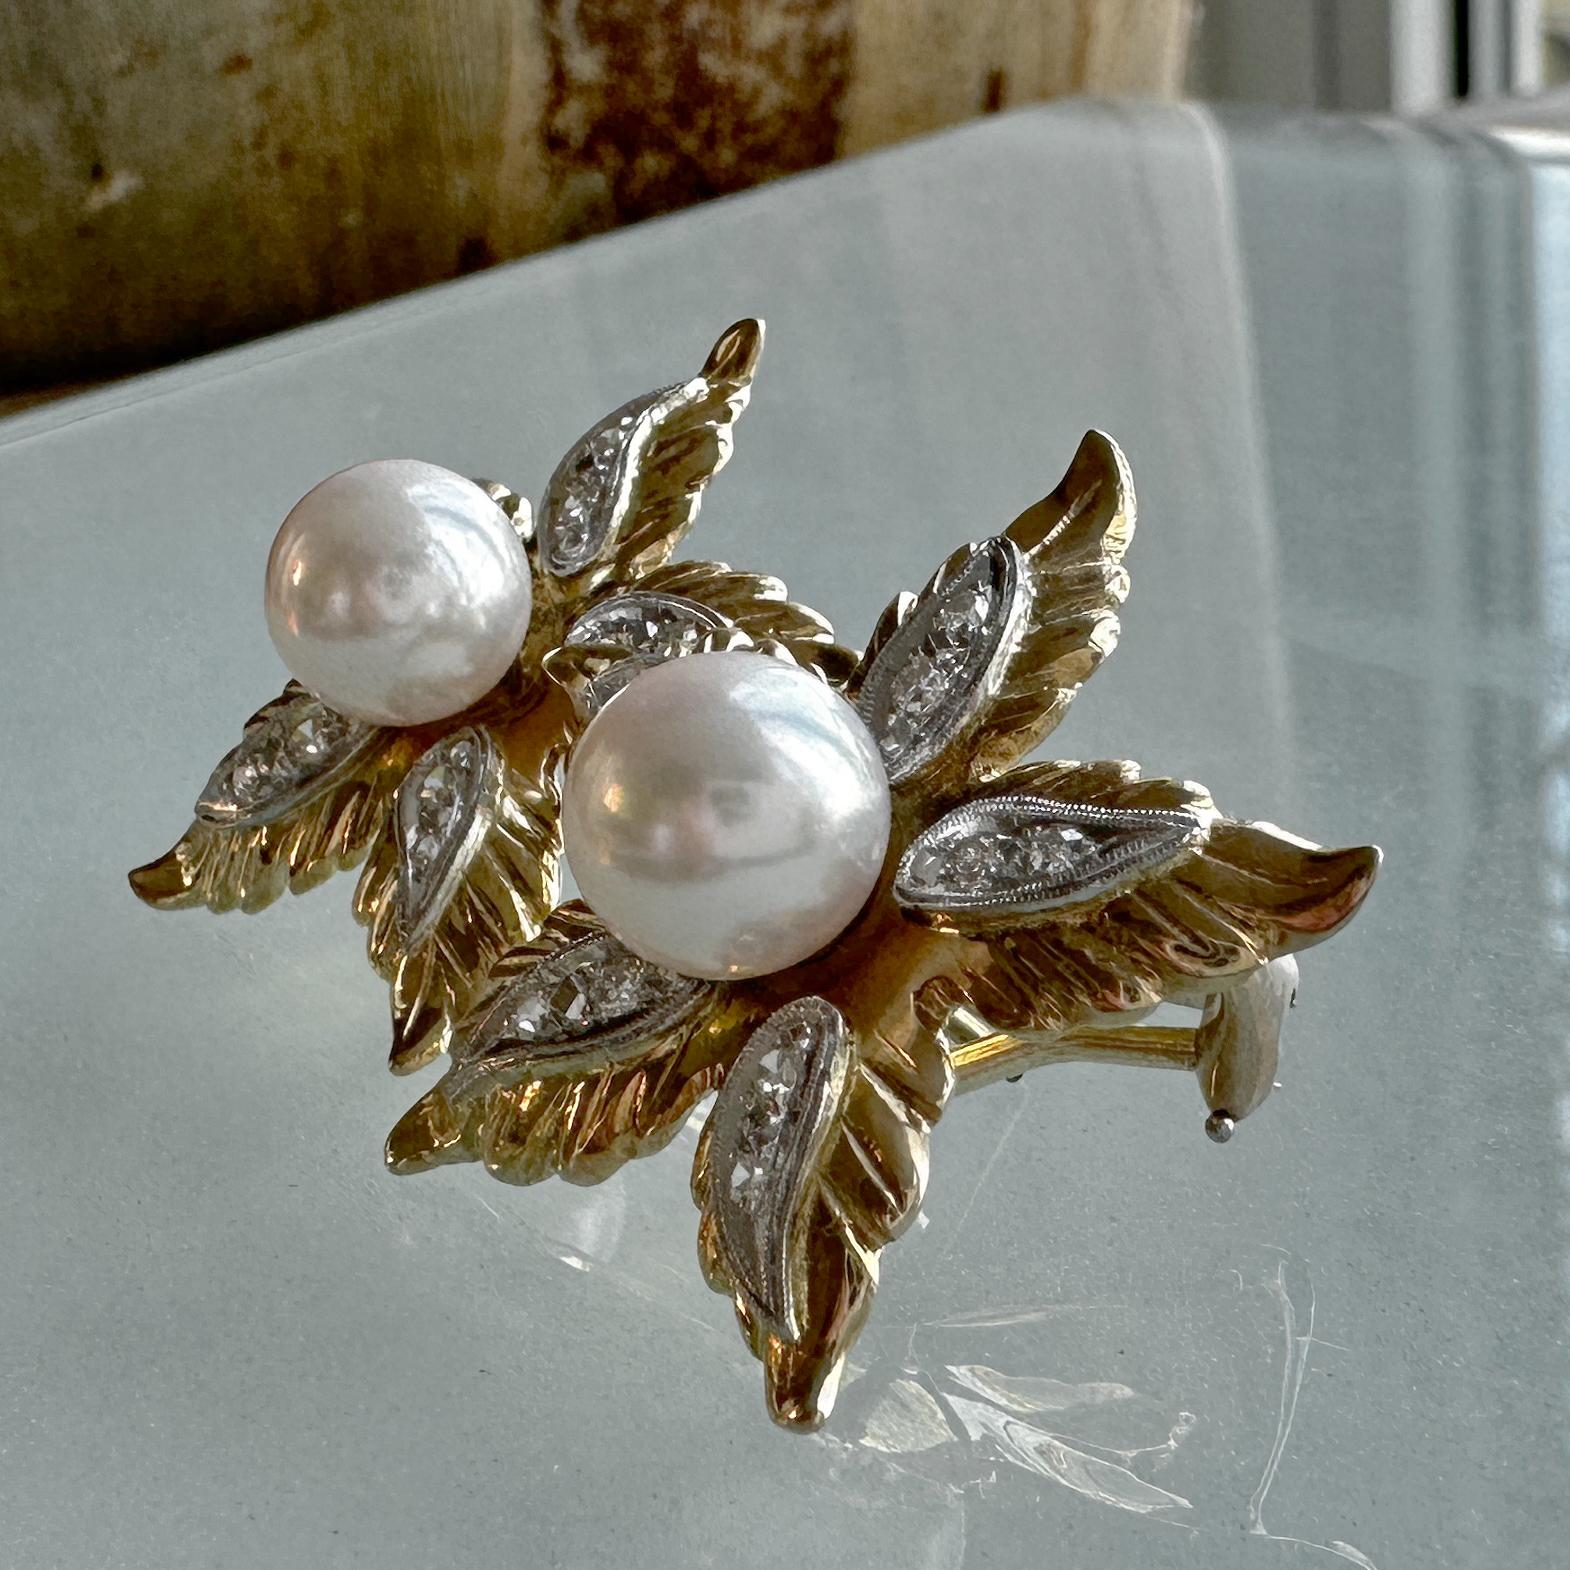 8.5mm Akoya Pearls in Large Flower Earrings of 18K Gold & Platinum with Diamonds In Excellent Condition For Sale In Sherman Oaks, CA